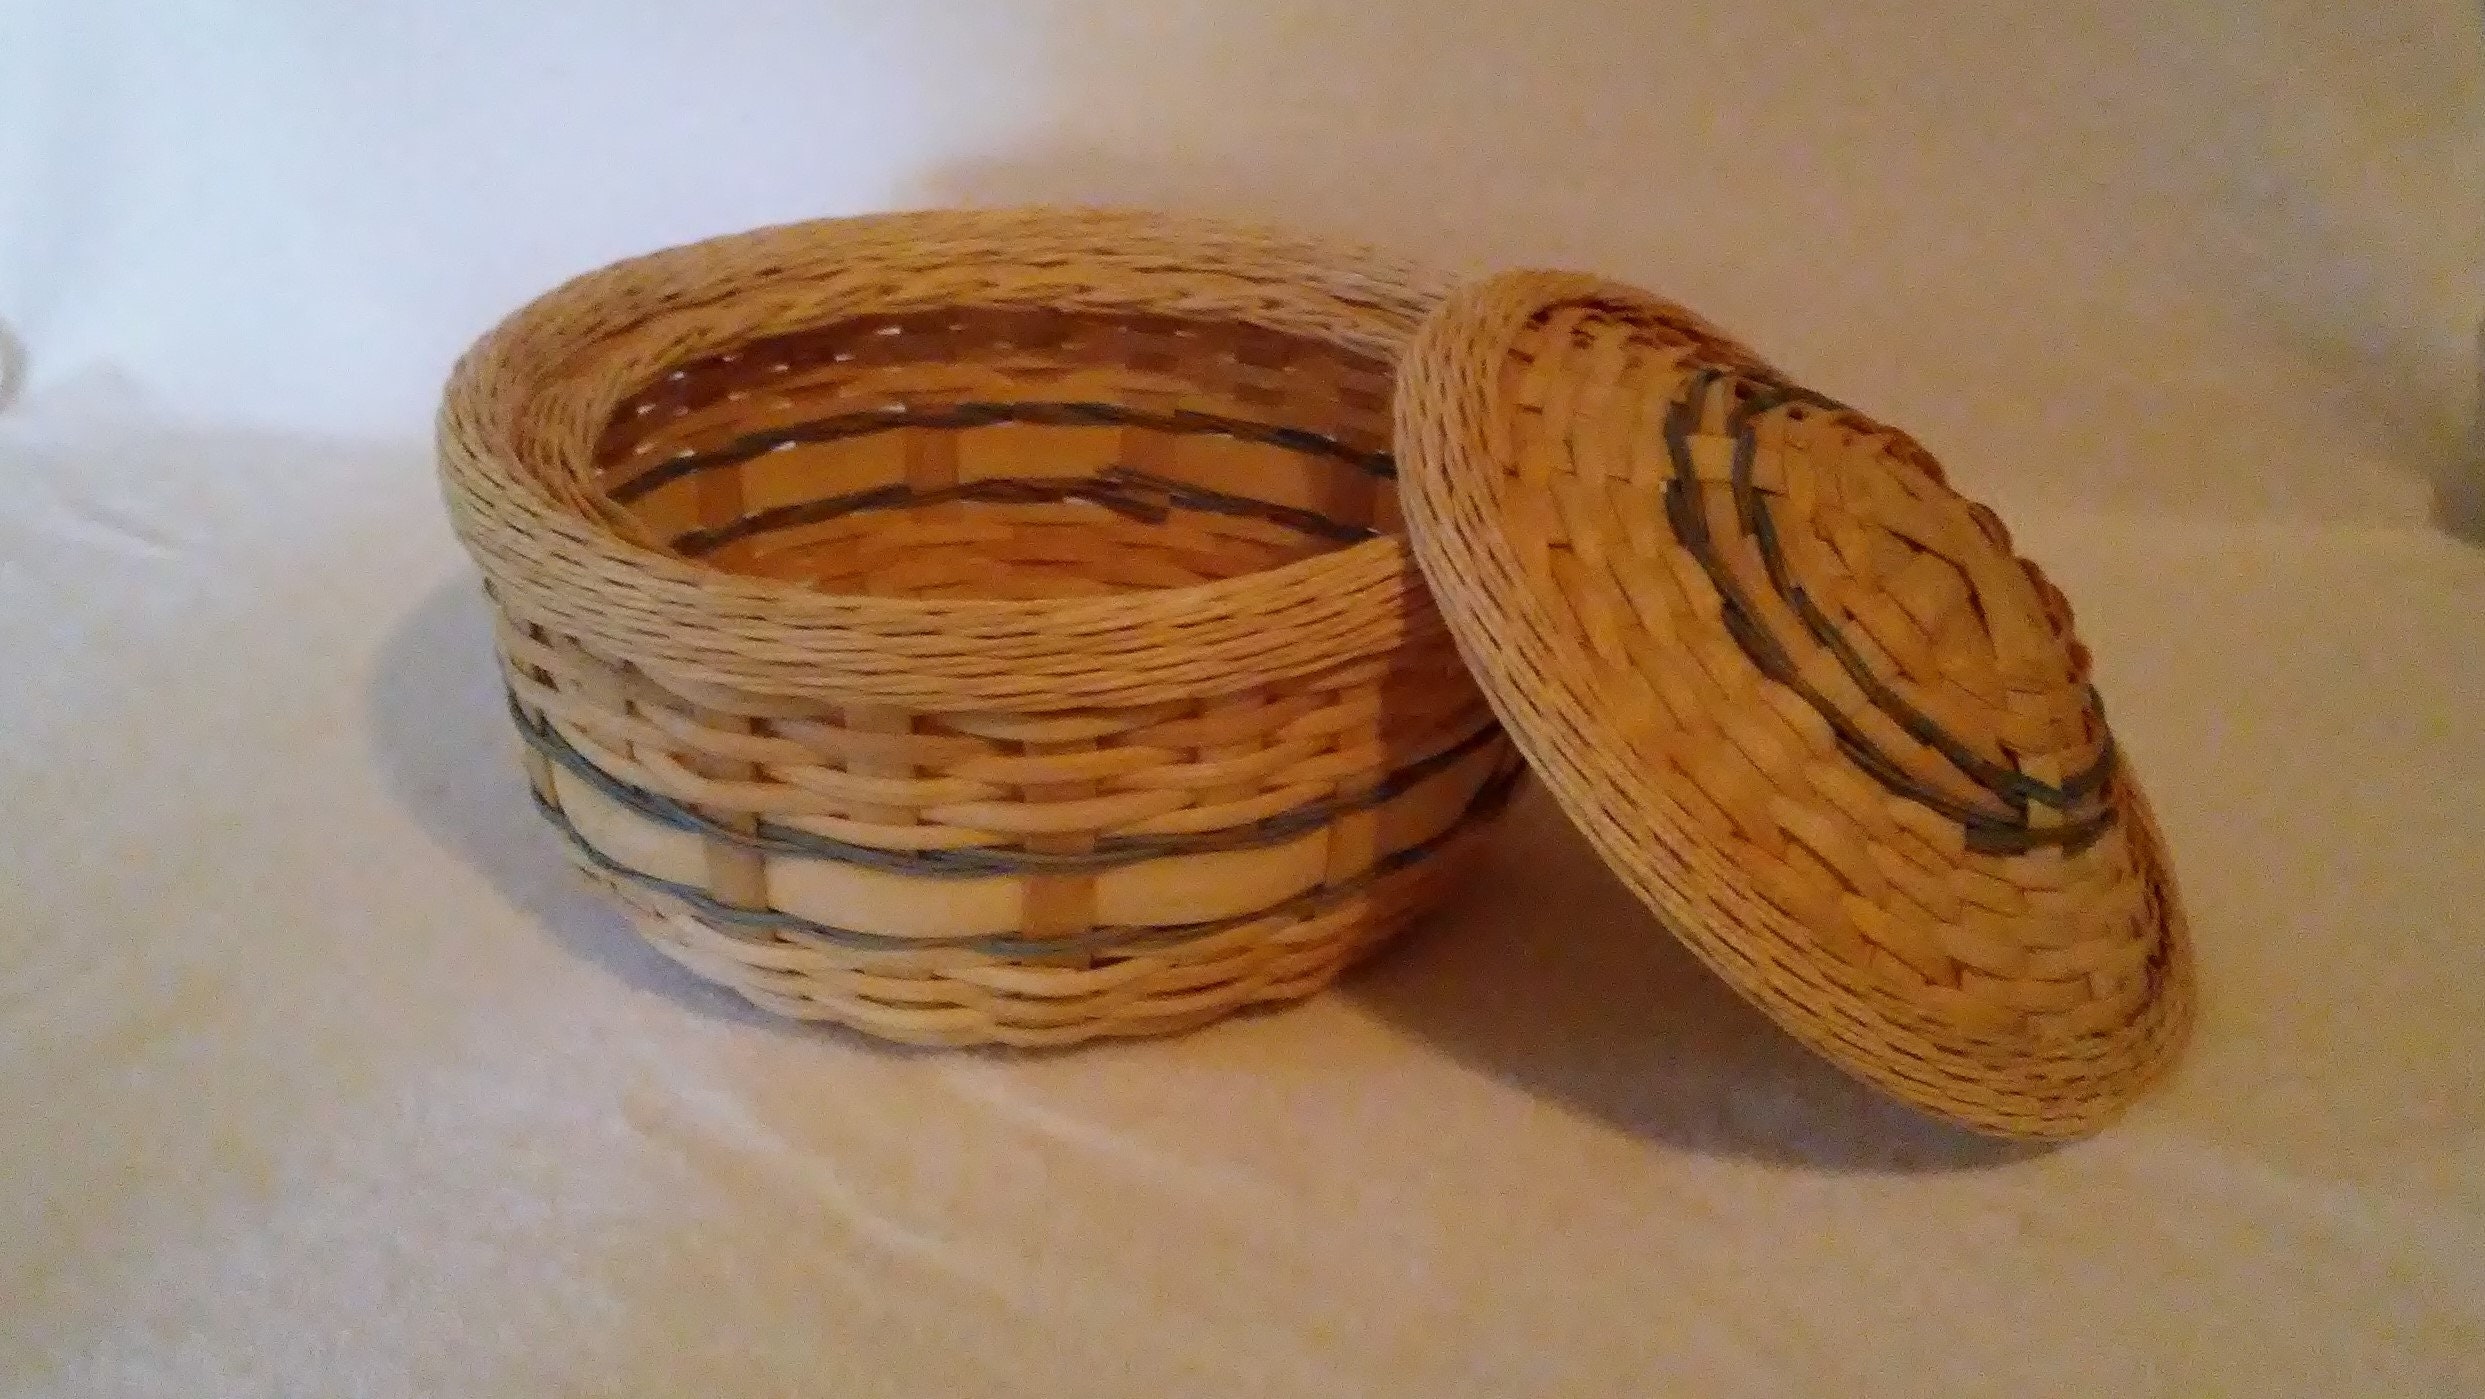 Basket Supplies: 12 Assorted Coils of Smoked Reed for Basket